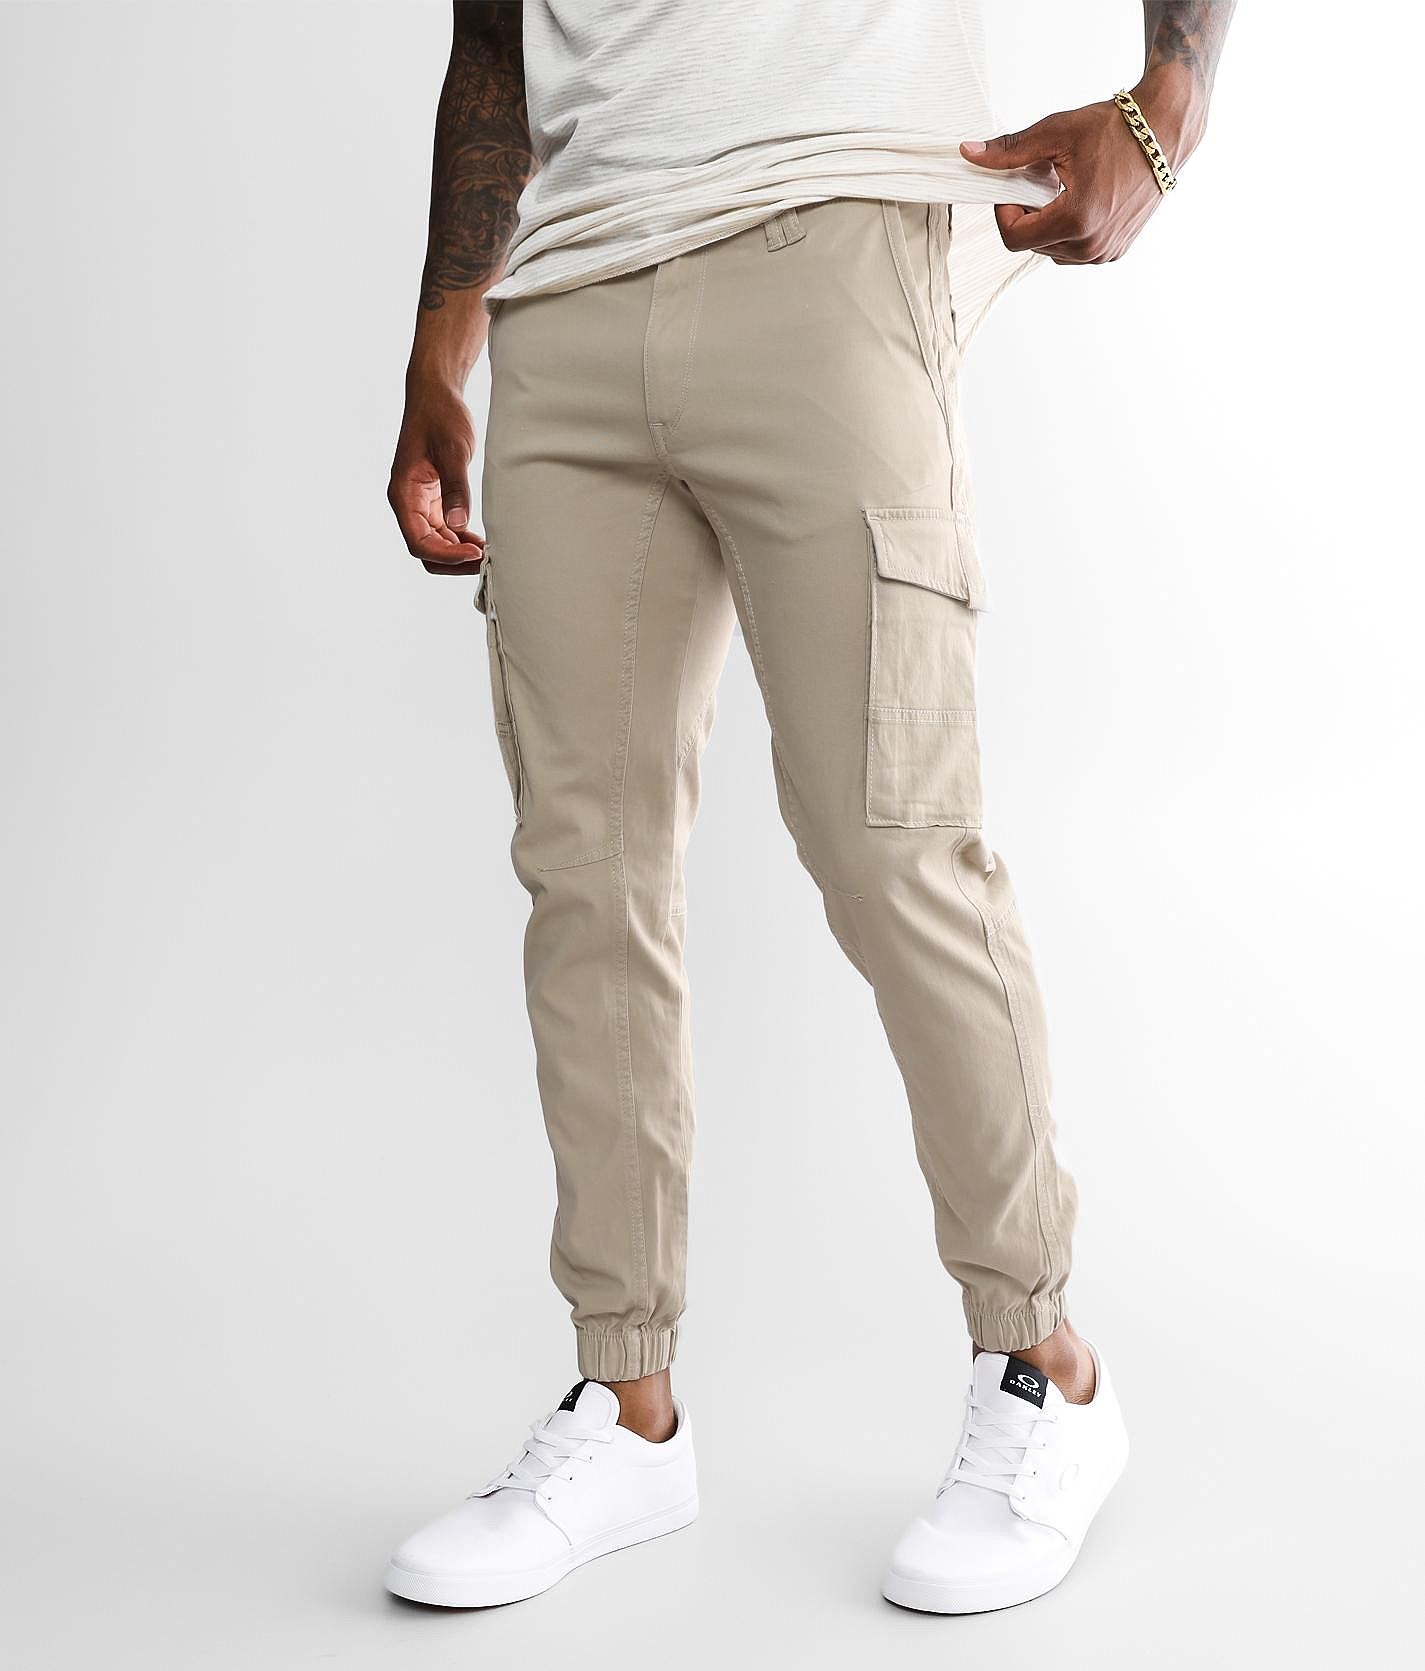 Departwest Twill Jogger Stretch Pant - Men's Pants in Tan